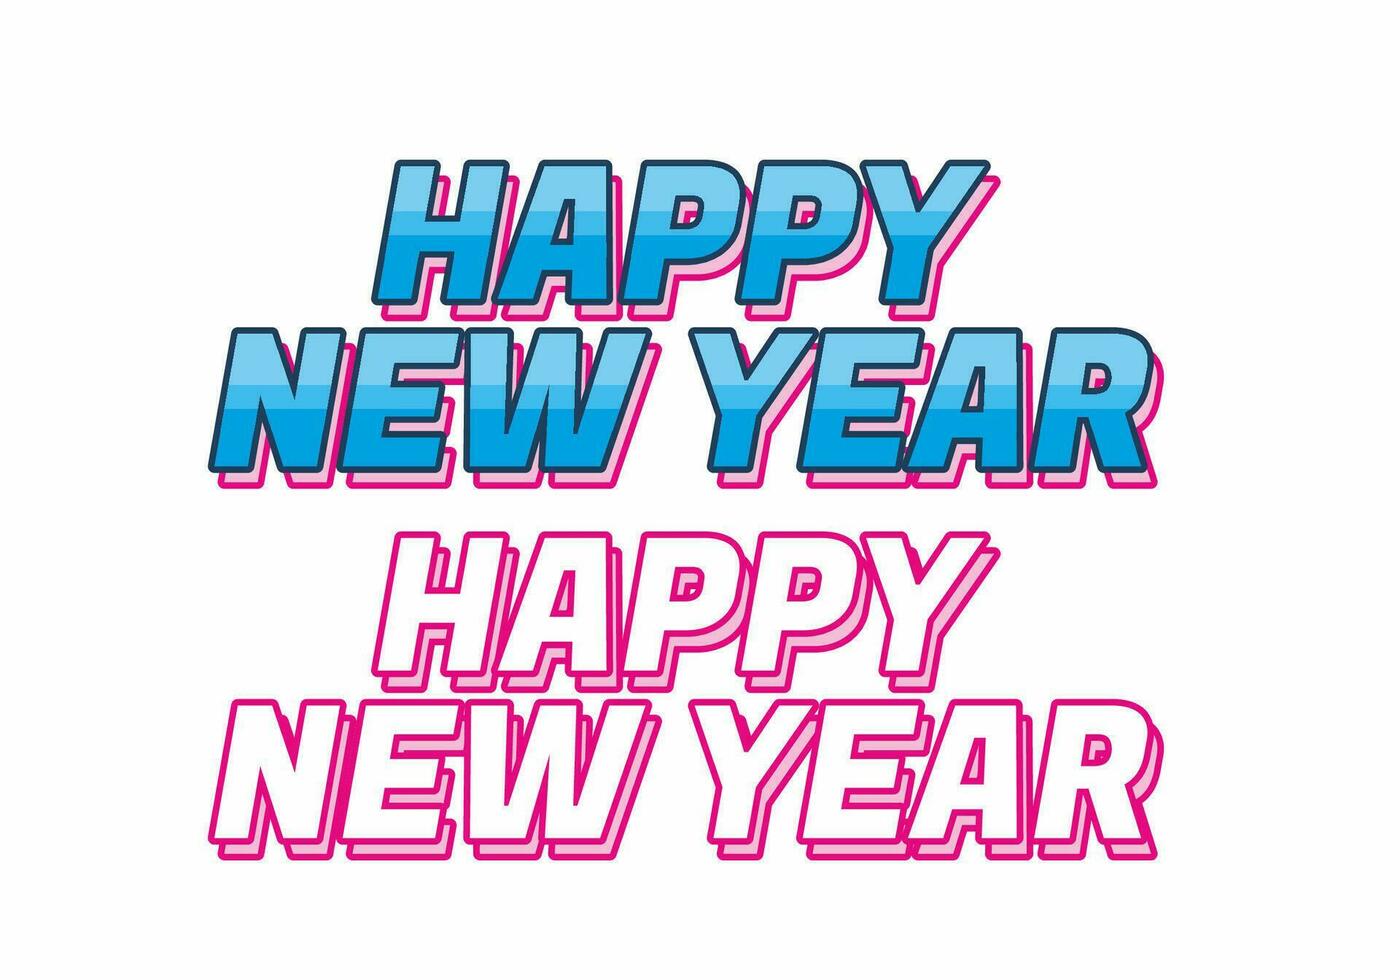 Happy new year text effect design in blue pink colors. white background vector